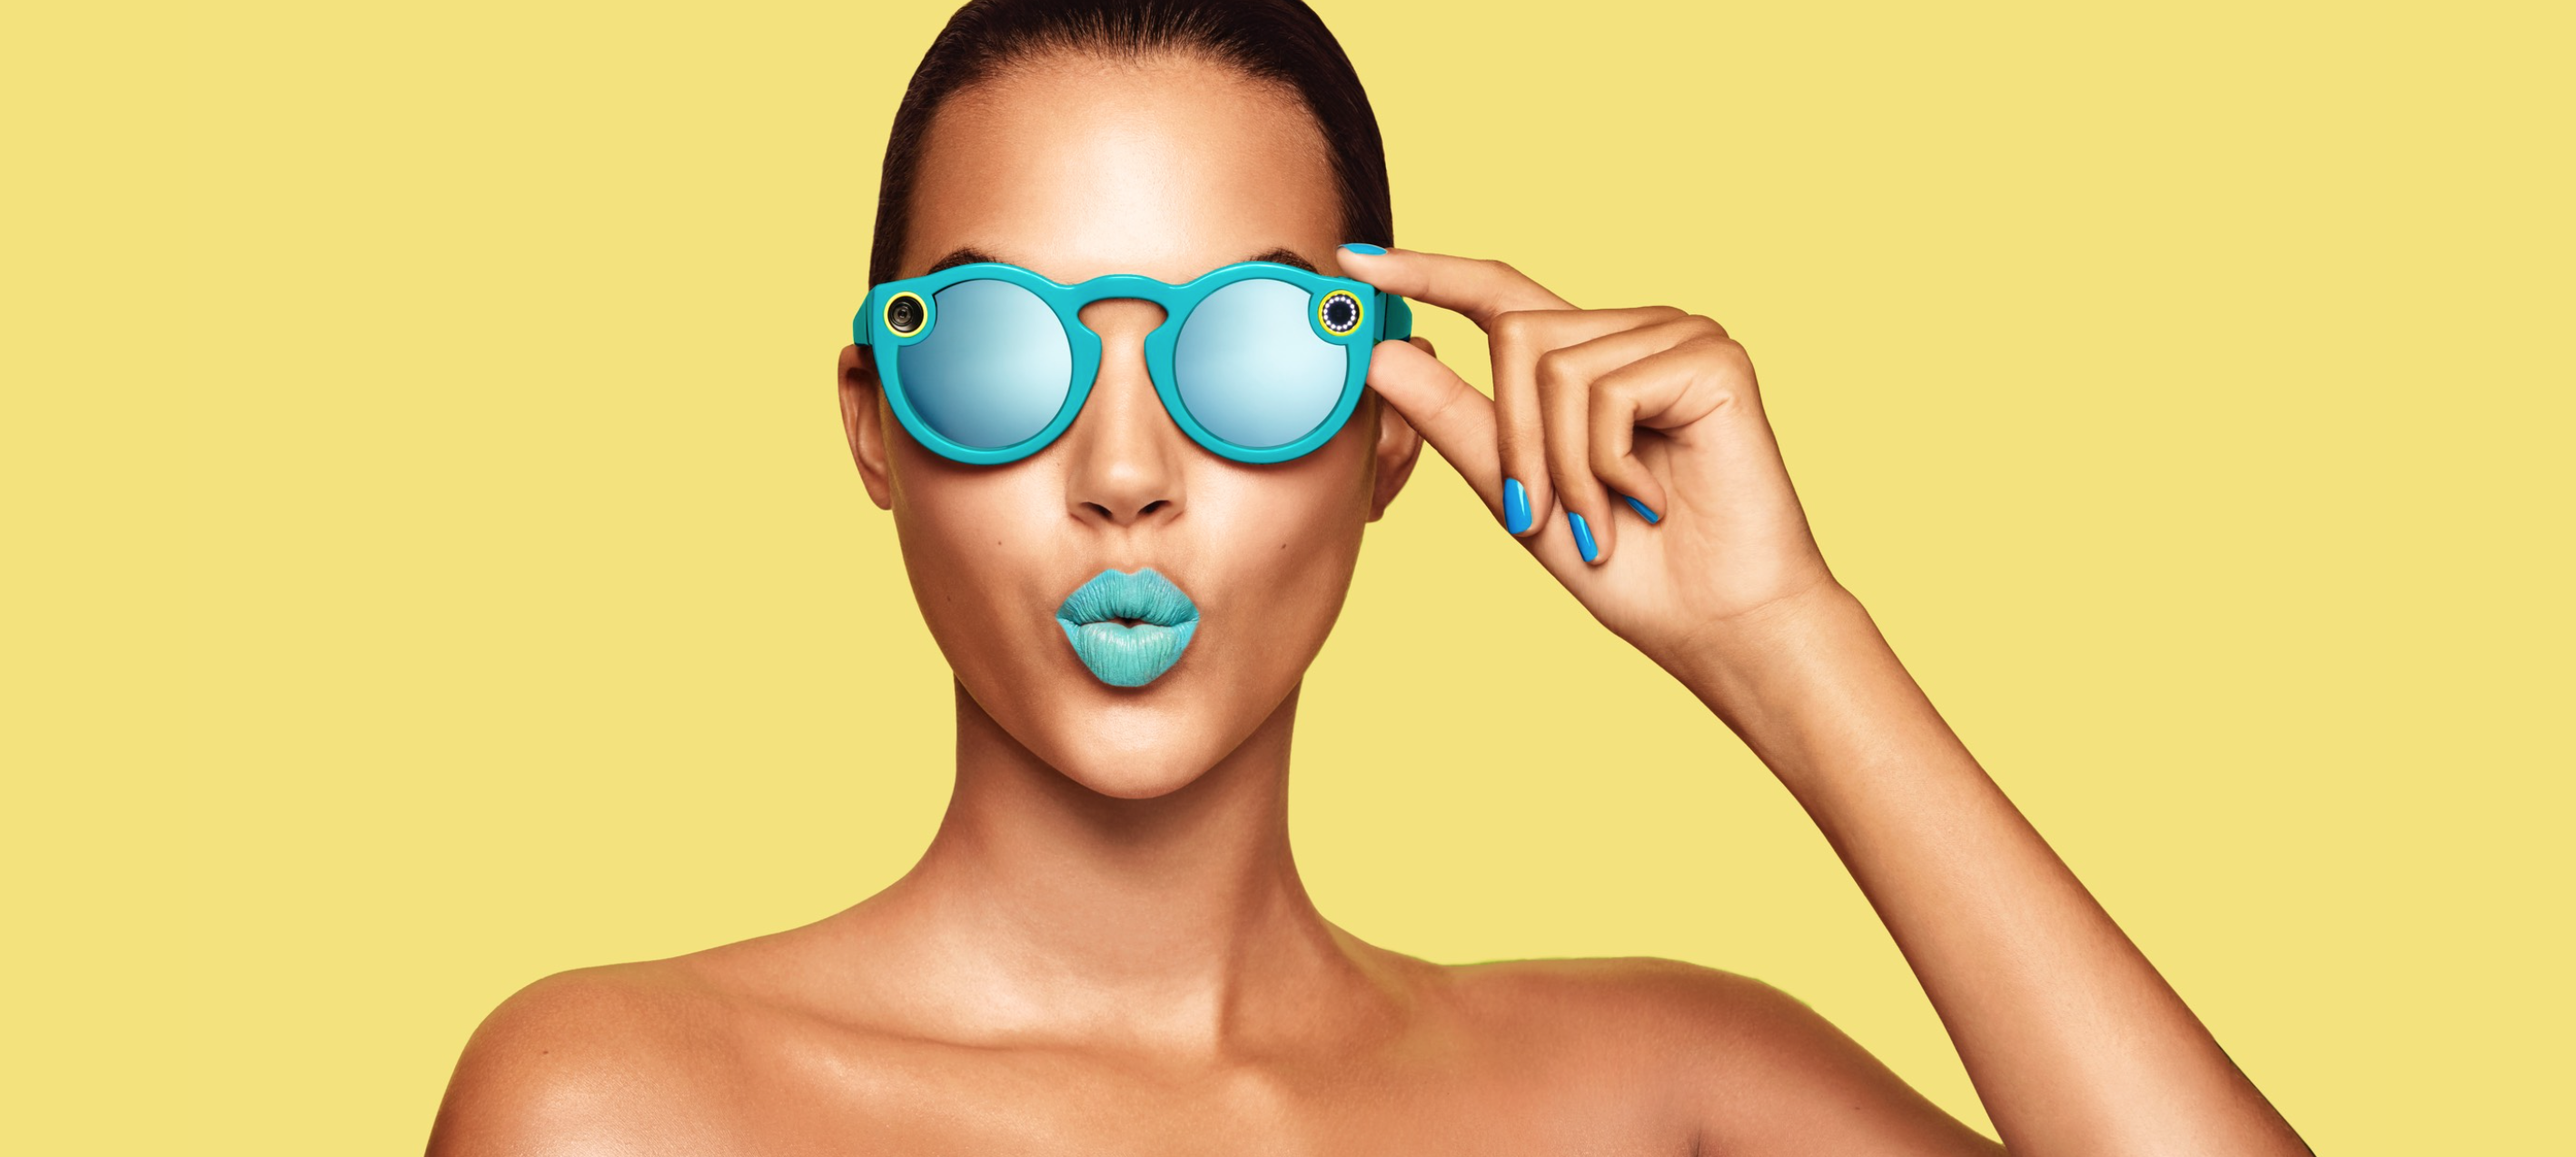 Spectacles by Snap, Inc